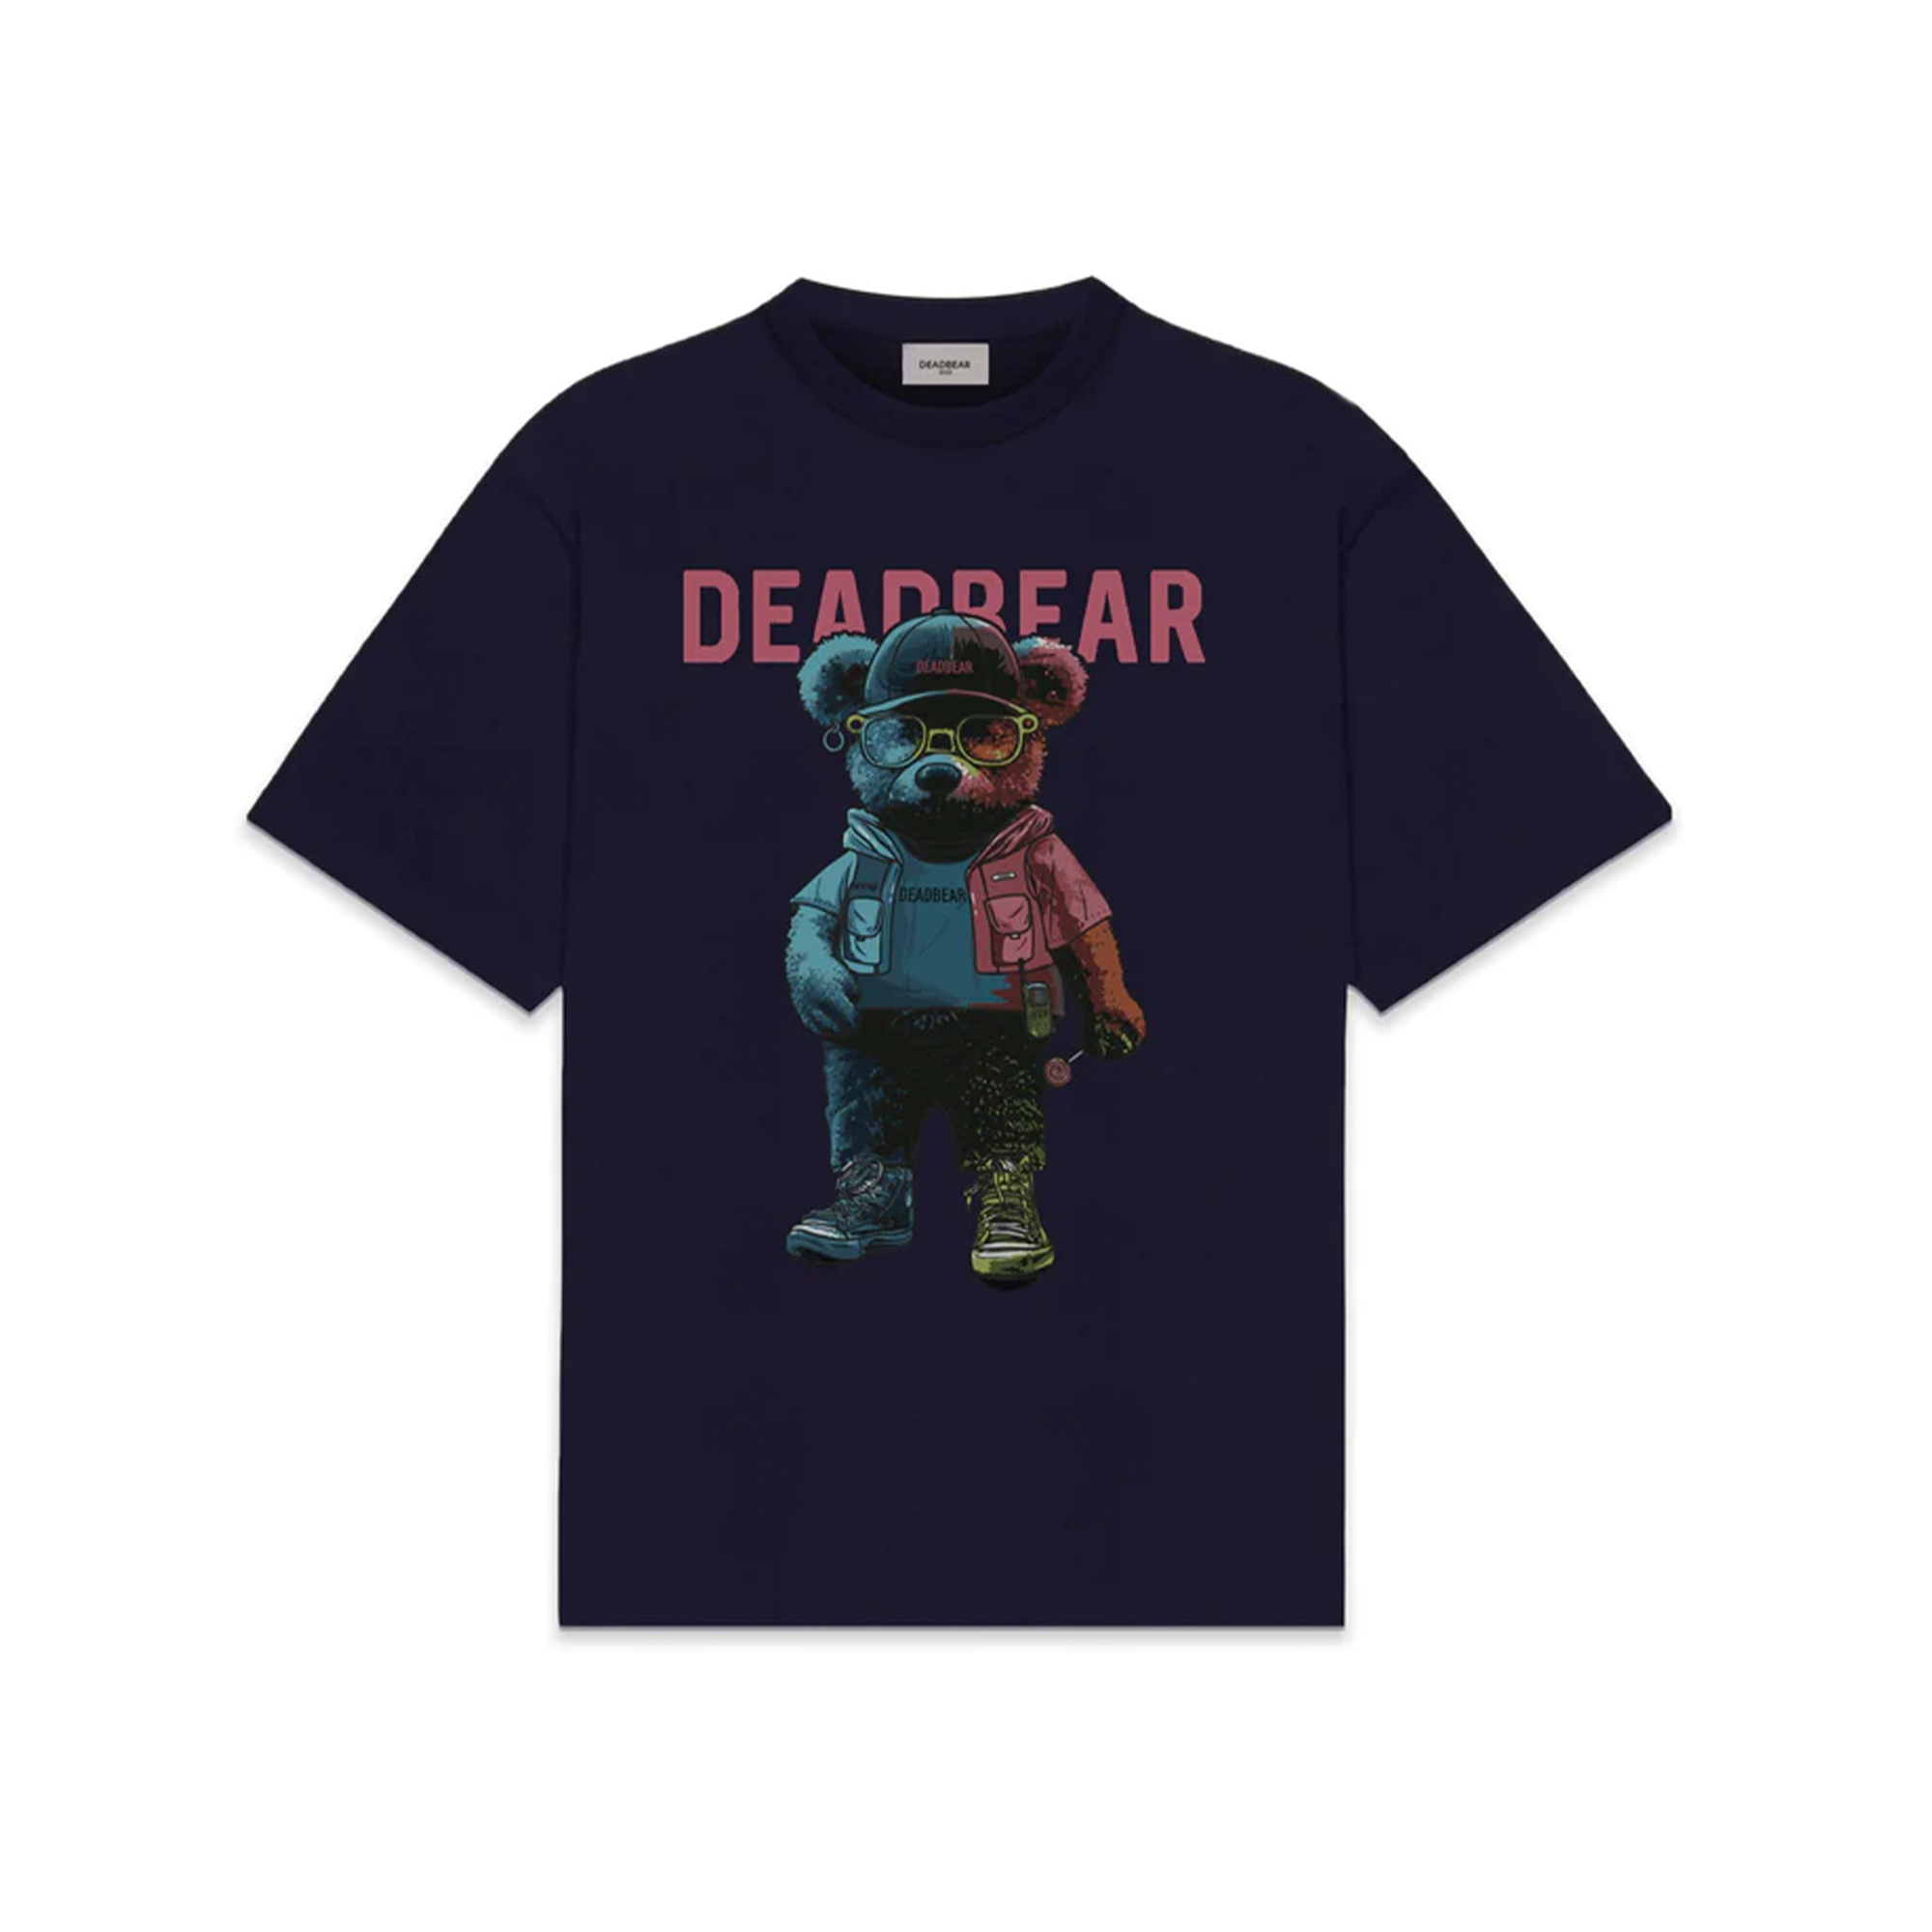 The Ted-Tee Navy Blue